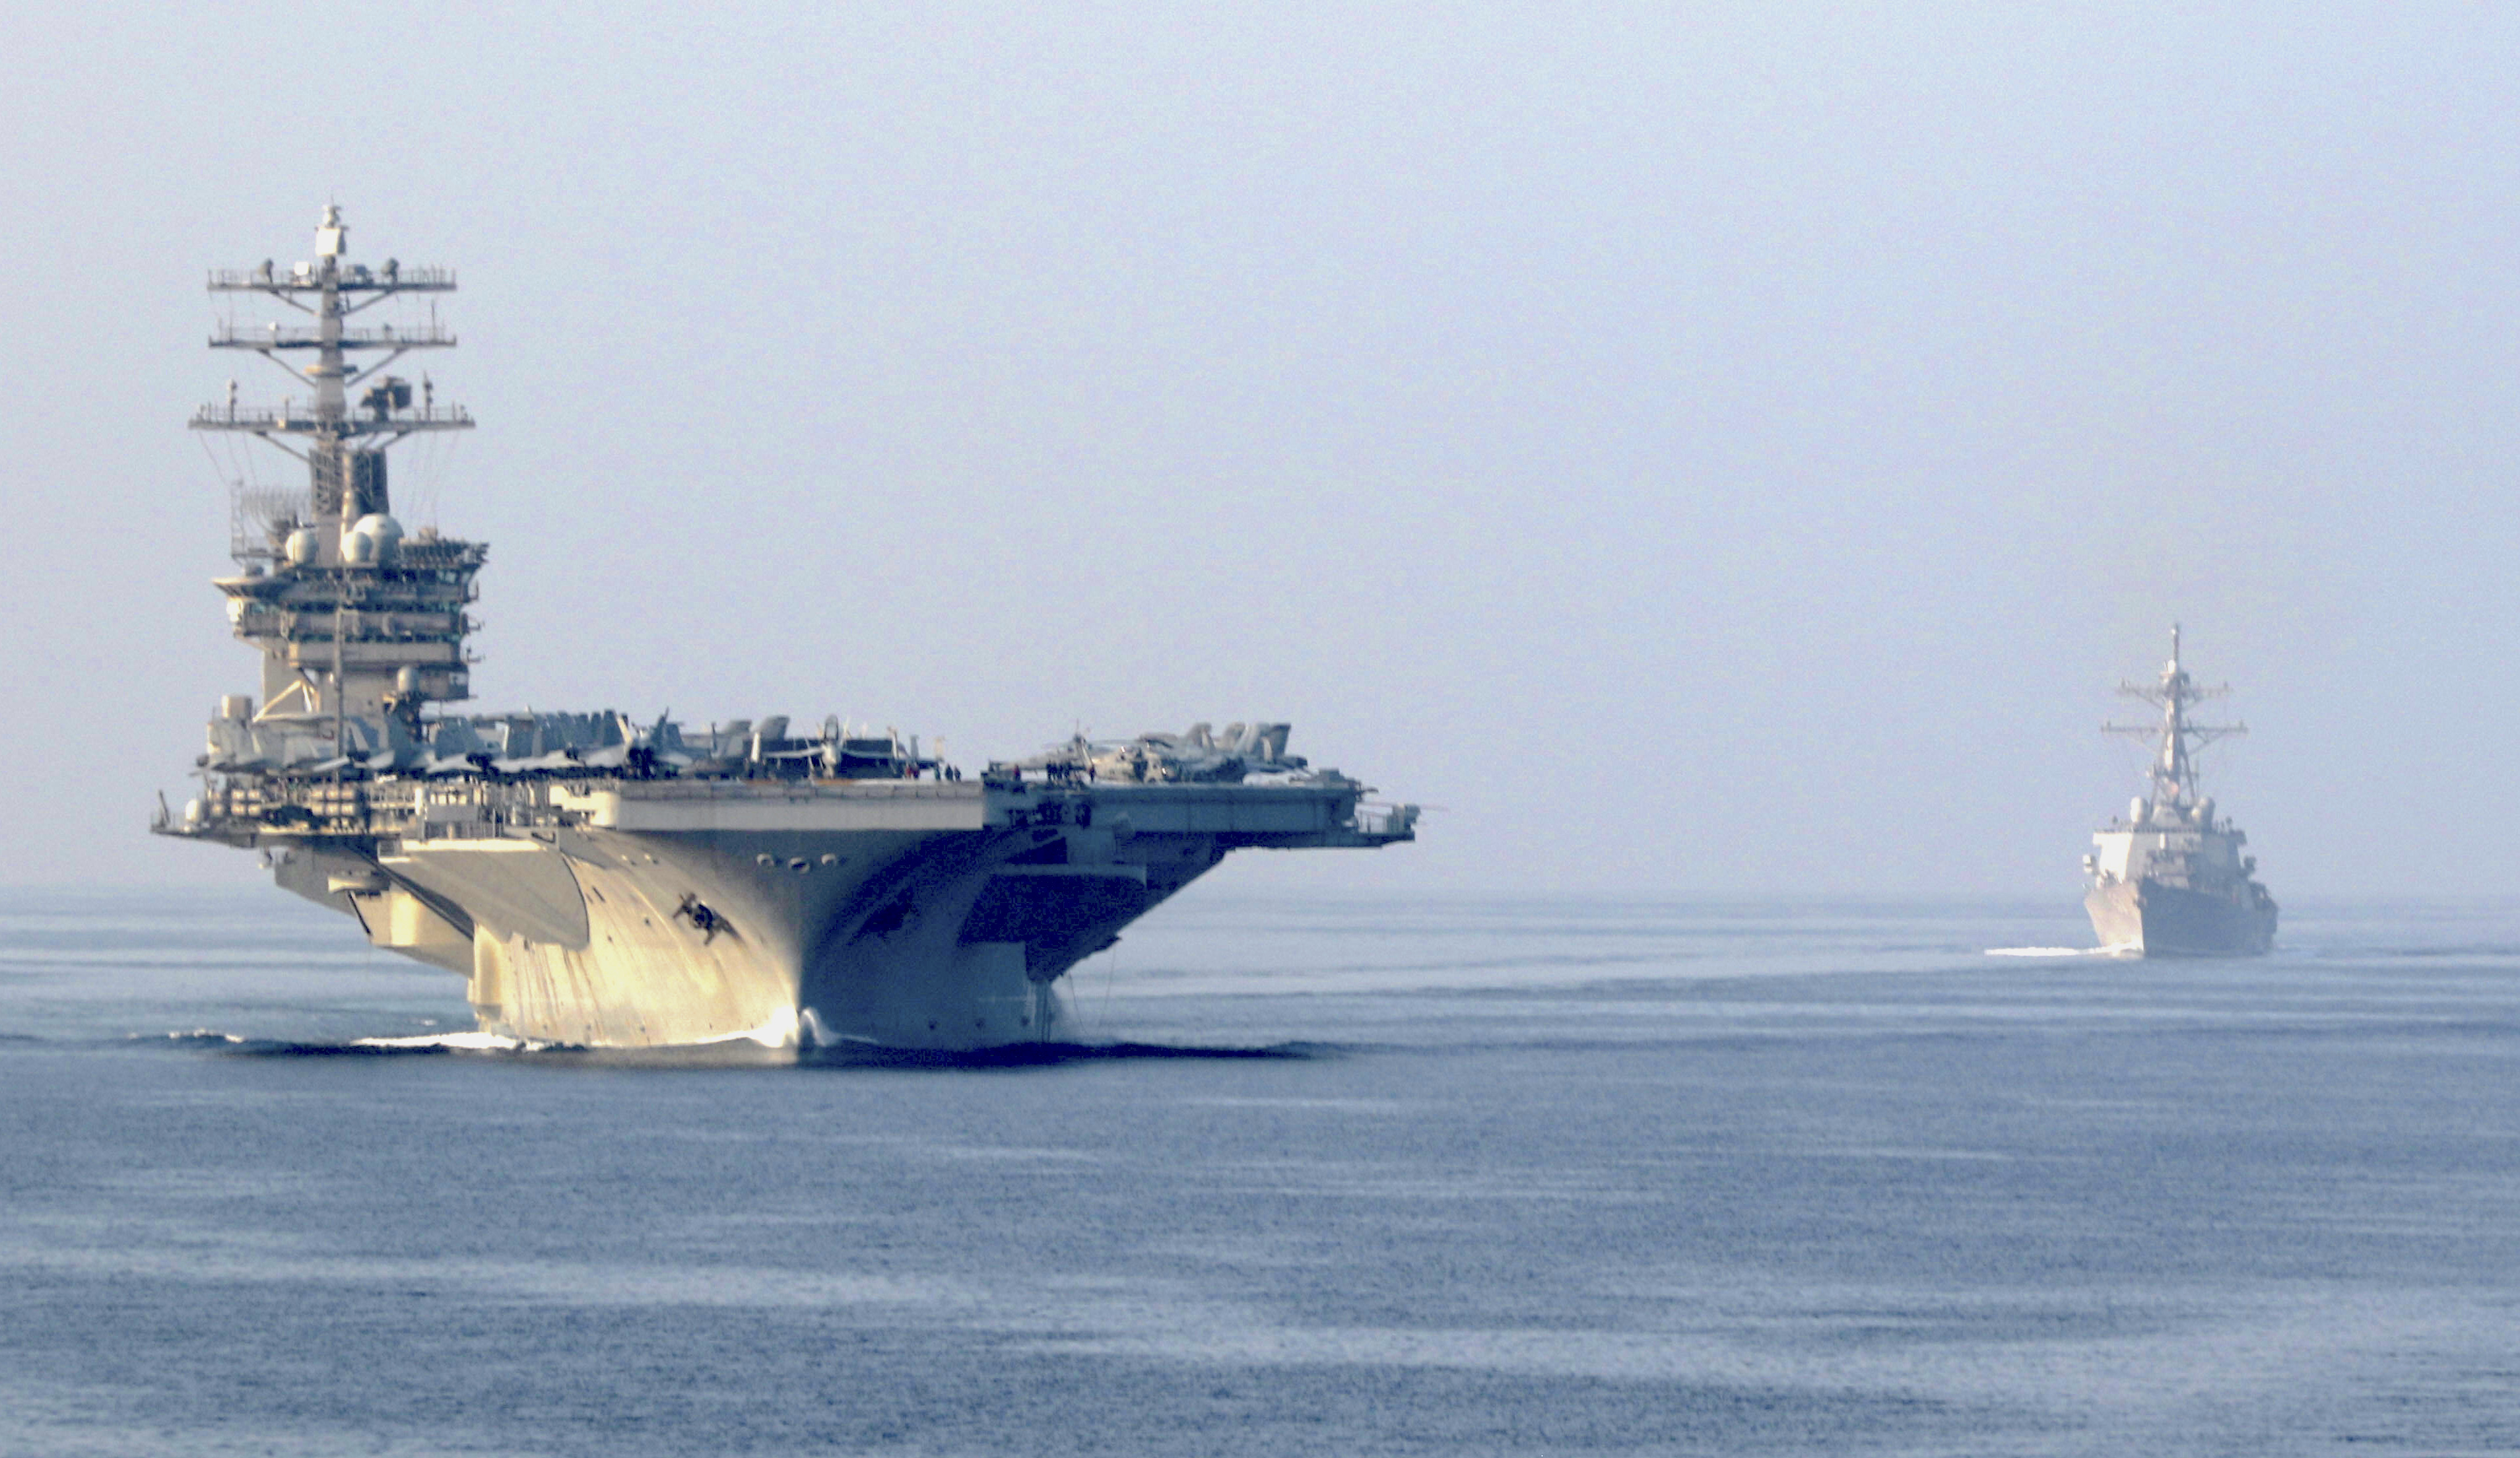 Pentagon: Carrier USS Nimitz Will Stay in Middle East After Threats from Iran - USNI News